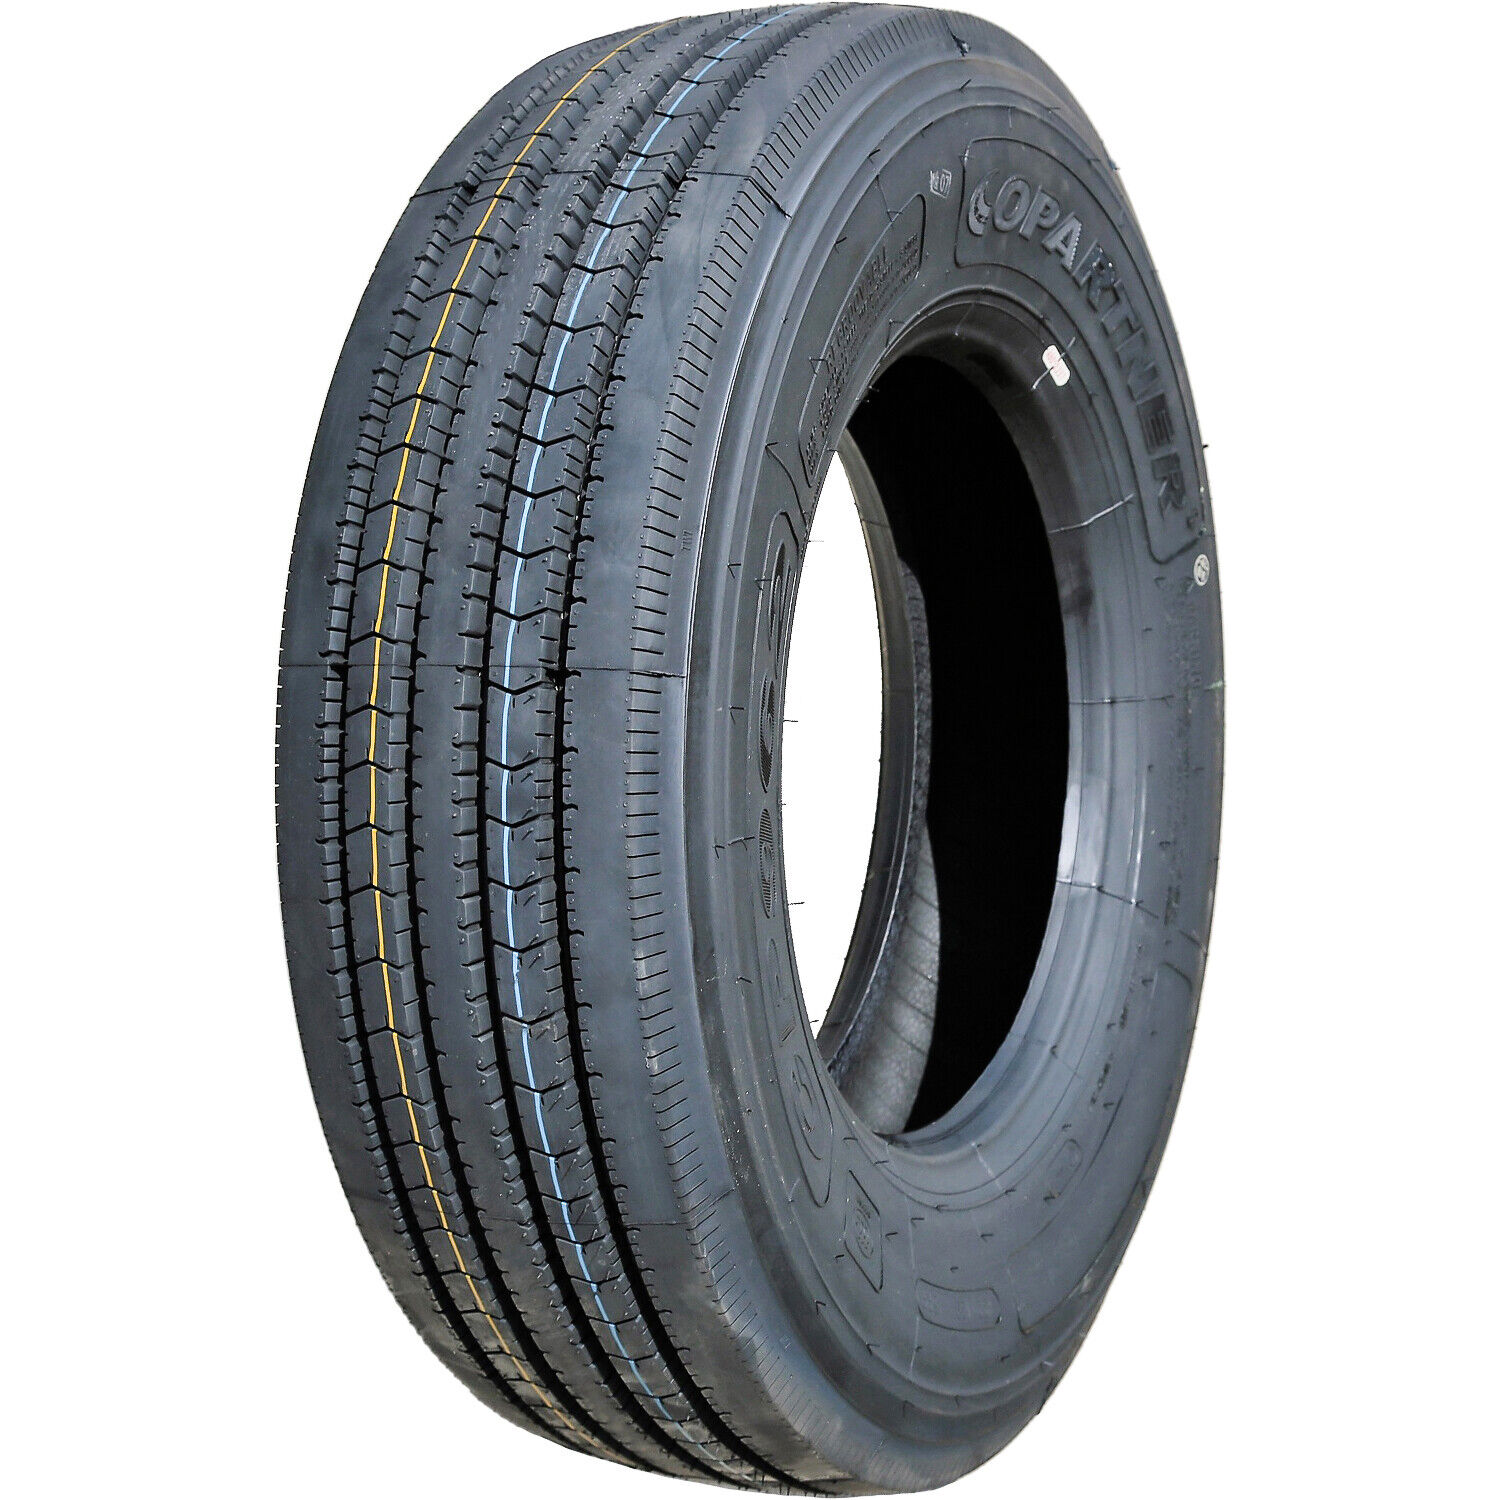 Tire Copartner CP962 215/75R17.5 Load H 16 Ply Commercial